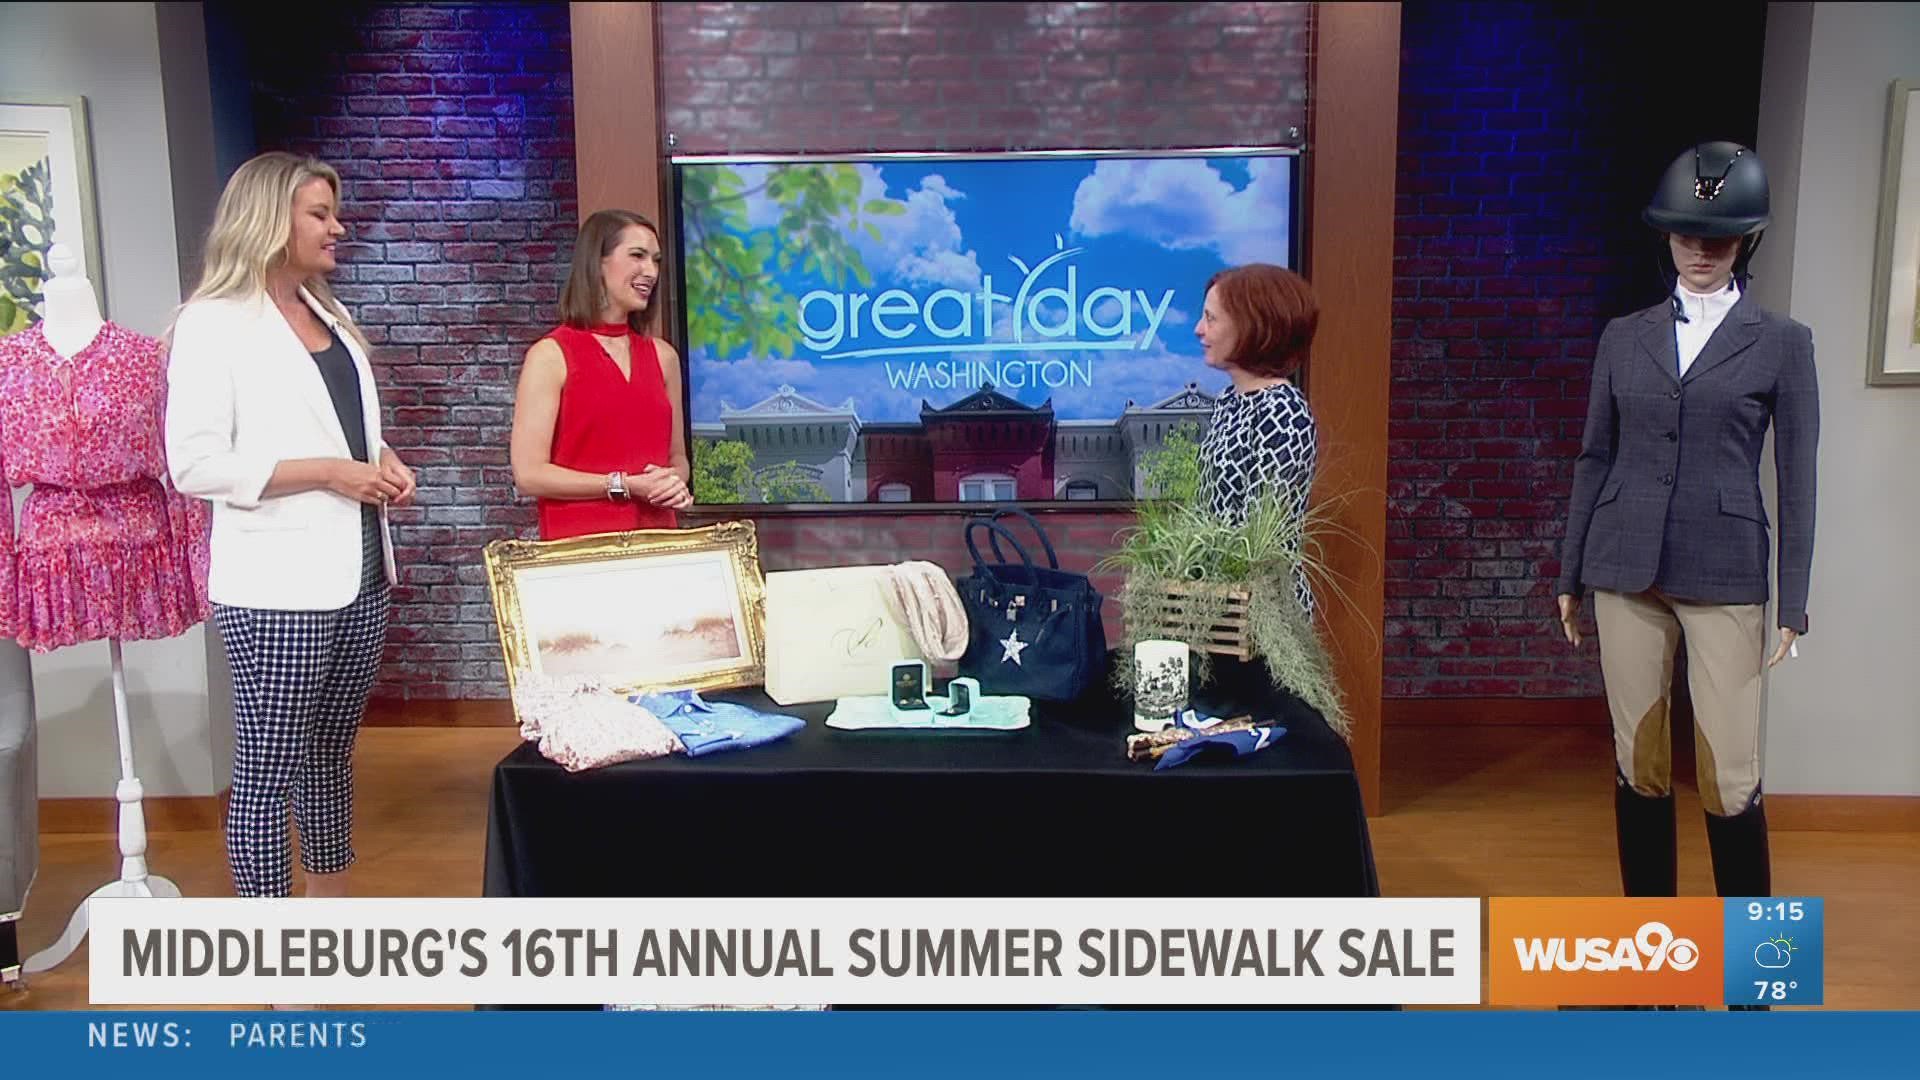 Middleburg is home to unique shops, boutiques, and restaurants. From August 5-7, many of the town’s retailers participate in the 16th annual Summer Sidewalk Sale.